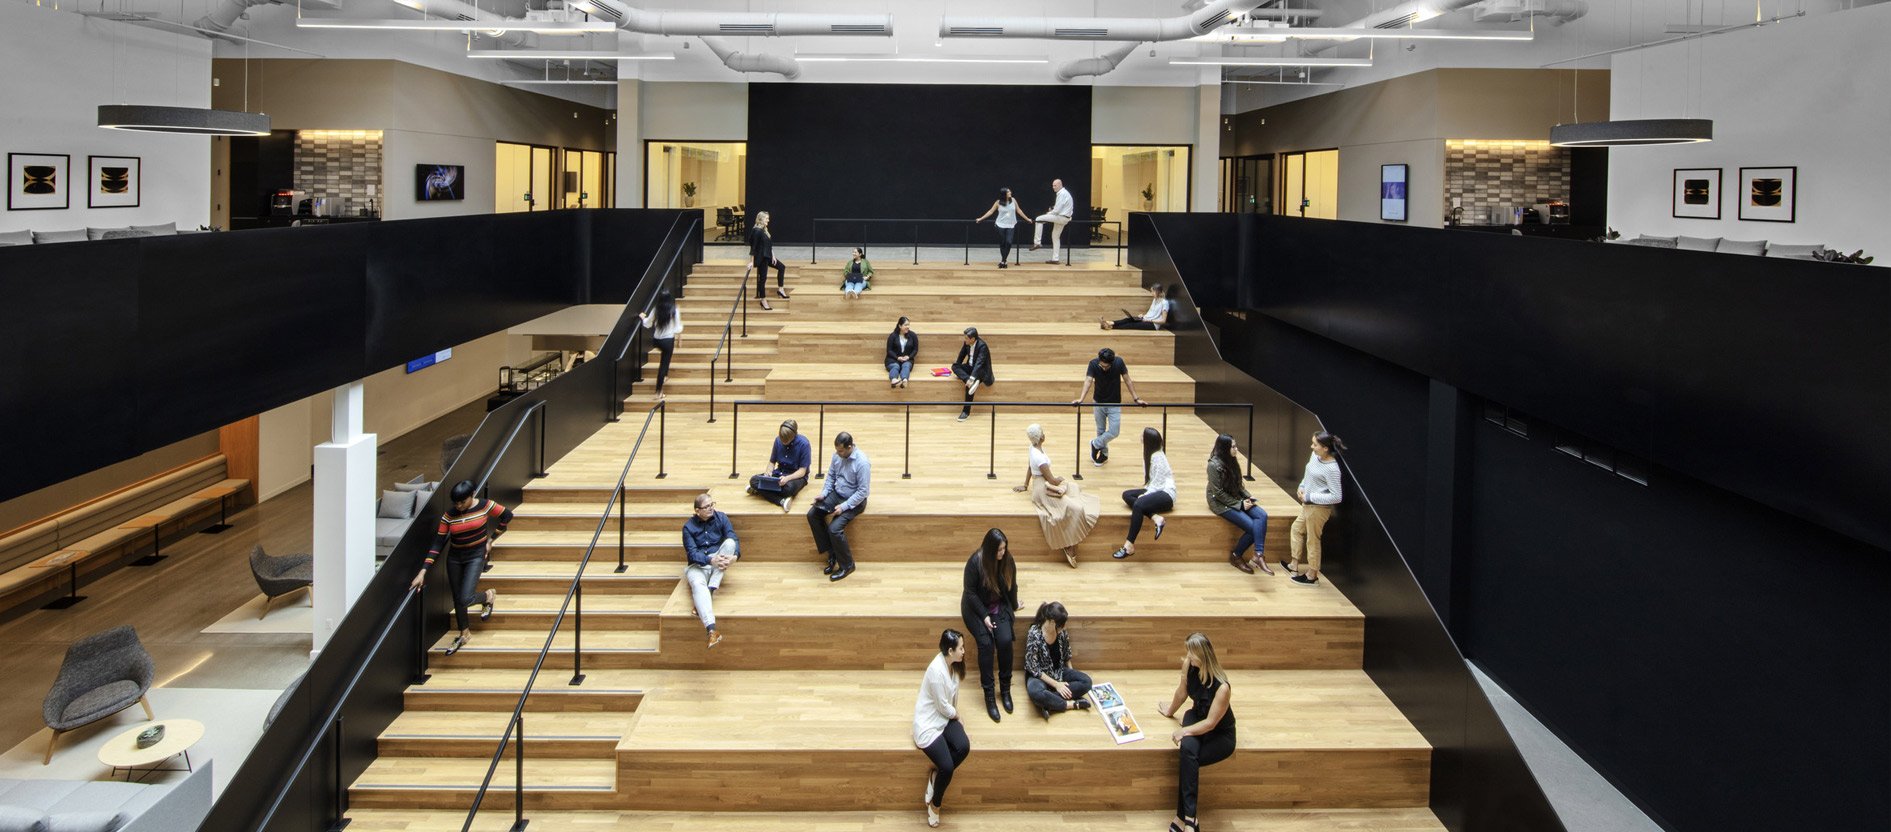 Modern office common area with employees collaborating and relaxing on tiered wooden seating steps, surrounded by sleek architectural features and ample natural light.